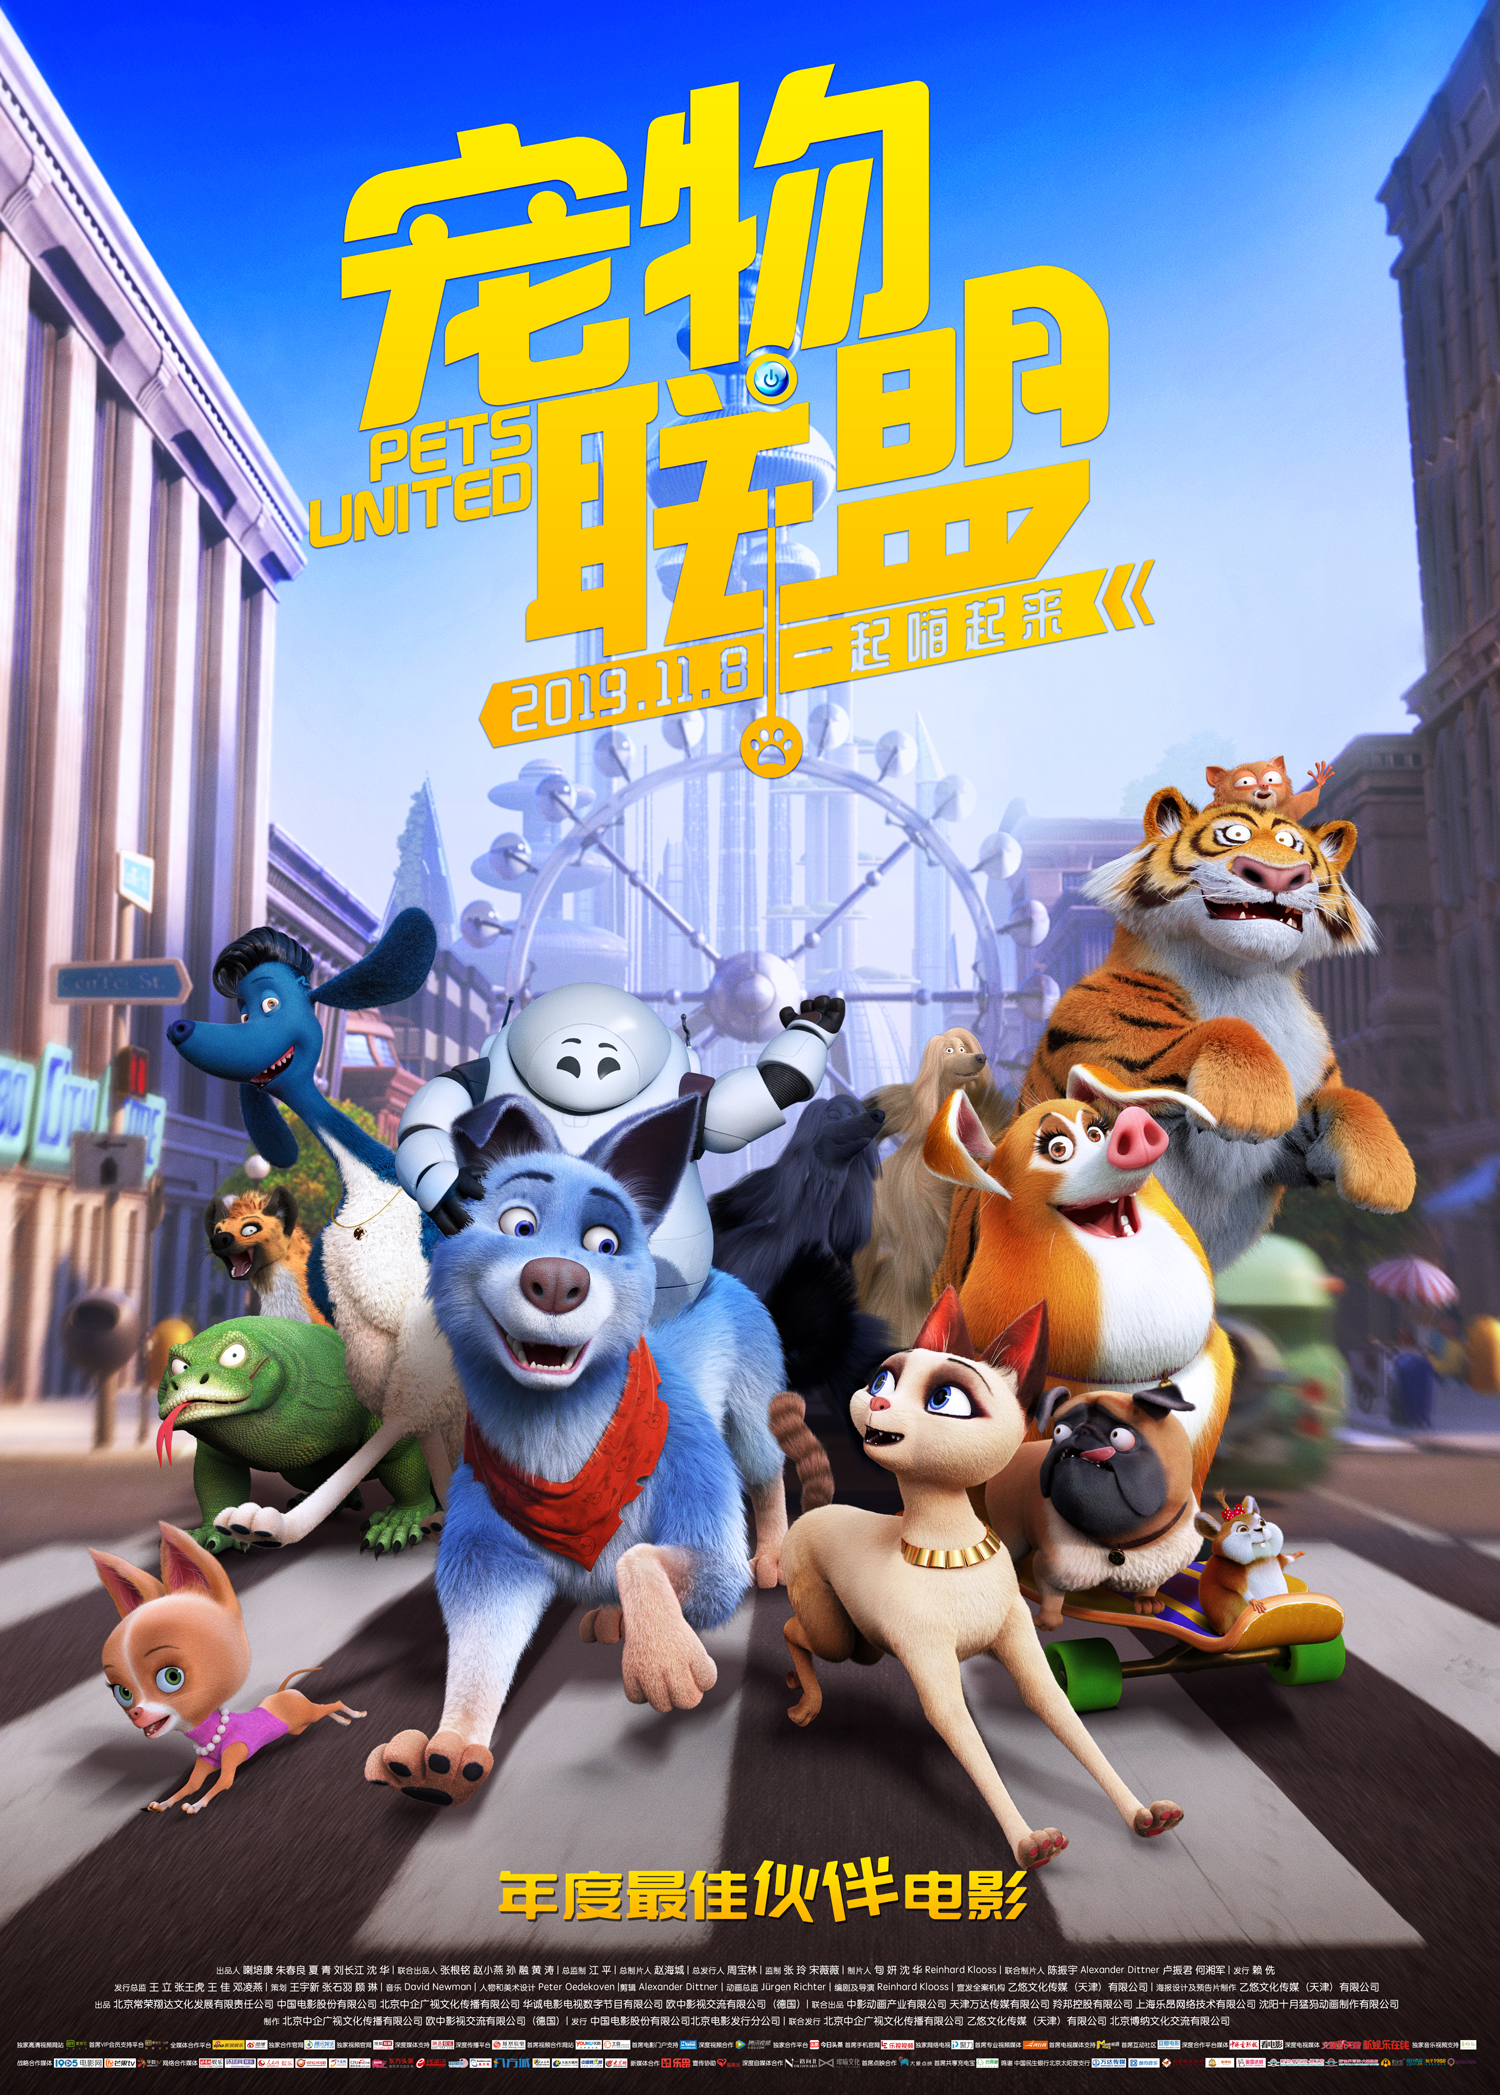 Pets United Poster Full Size Image Goldposter